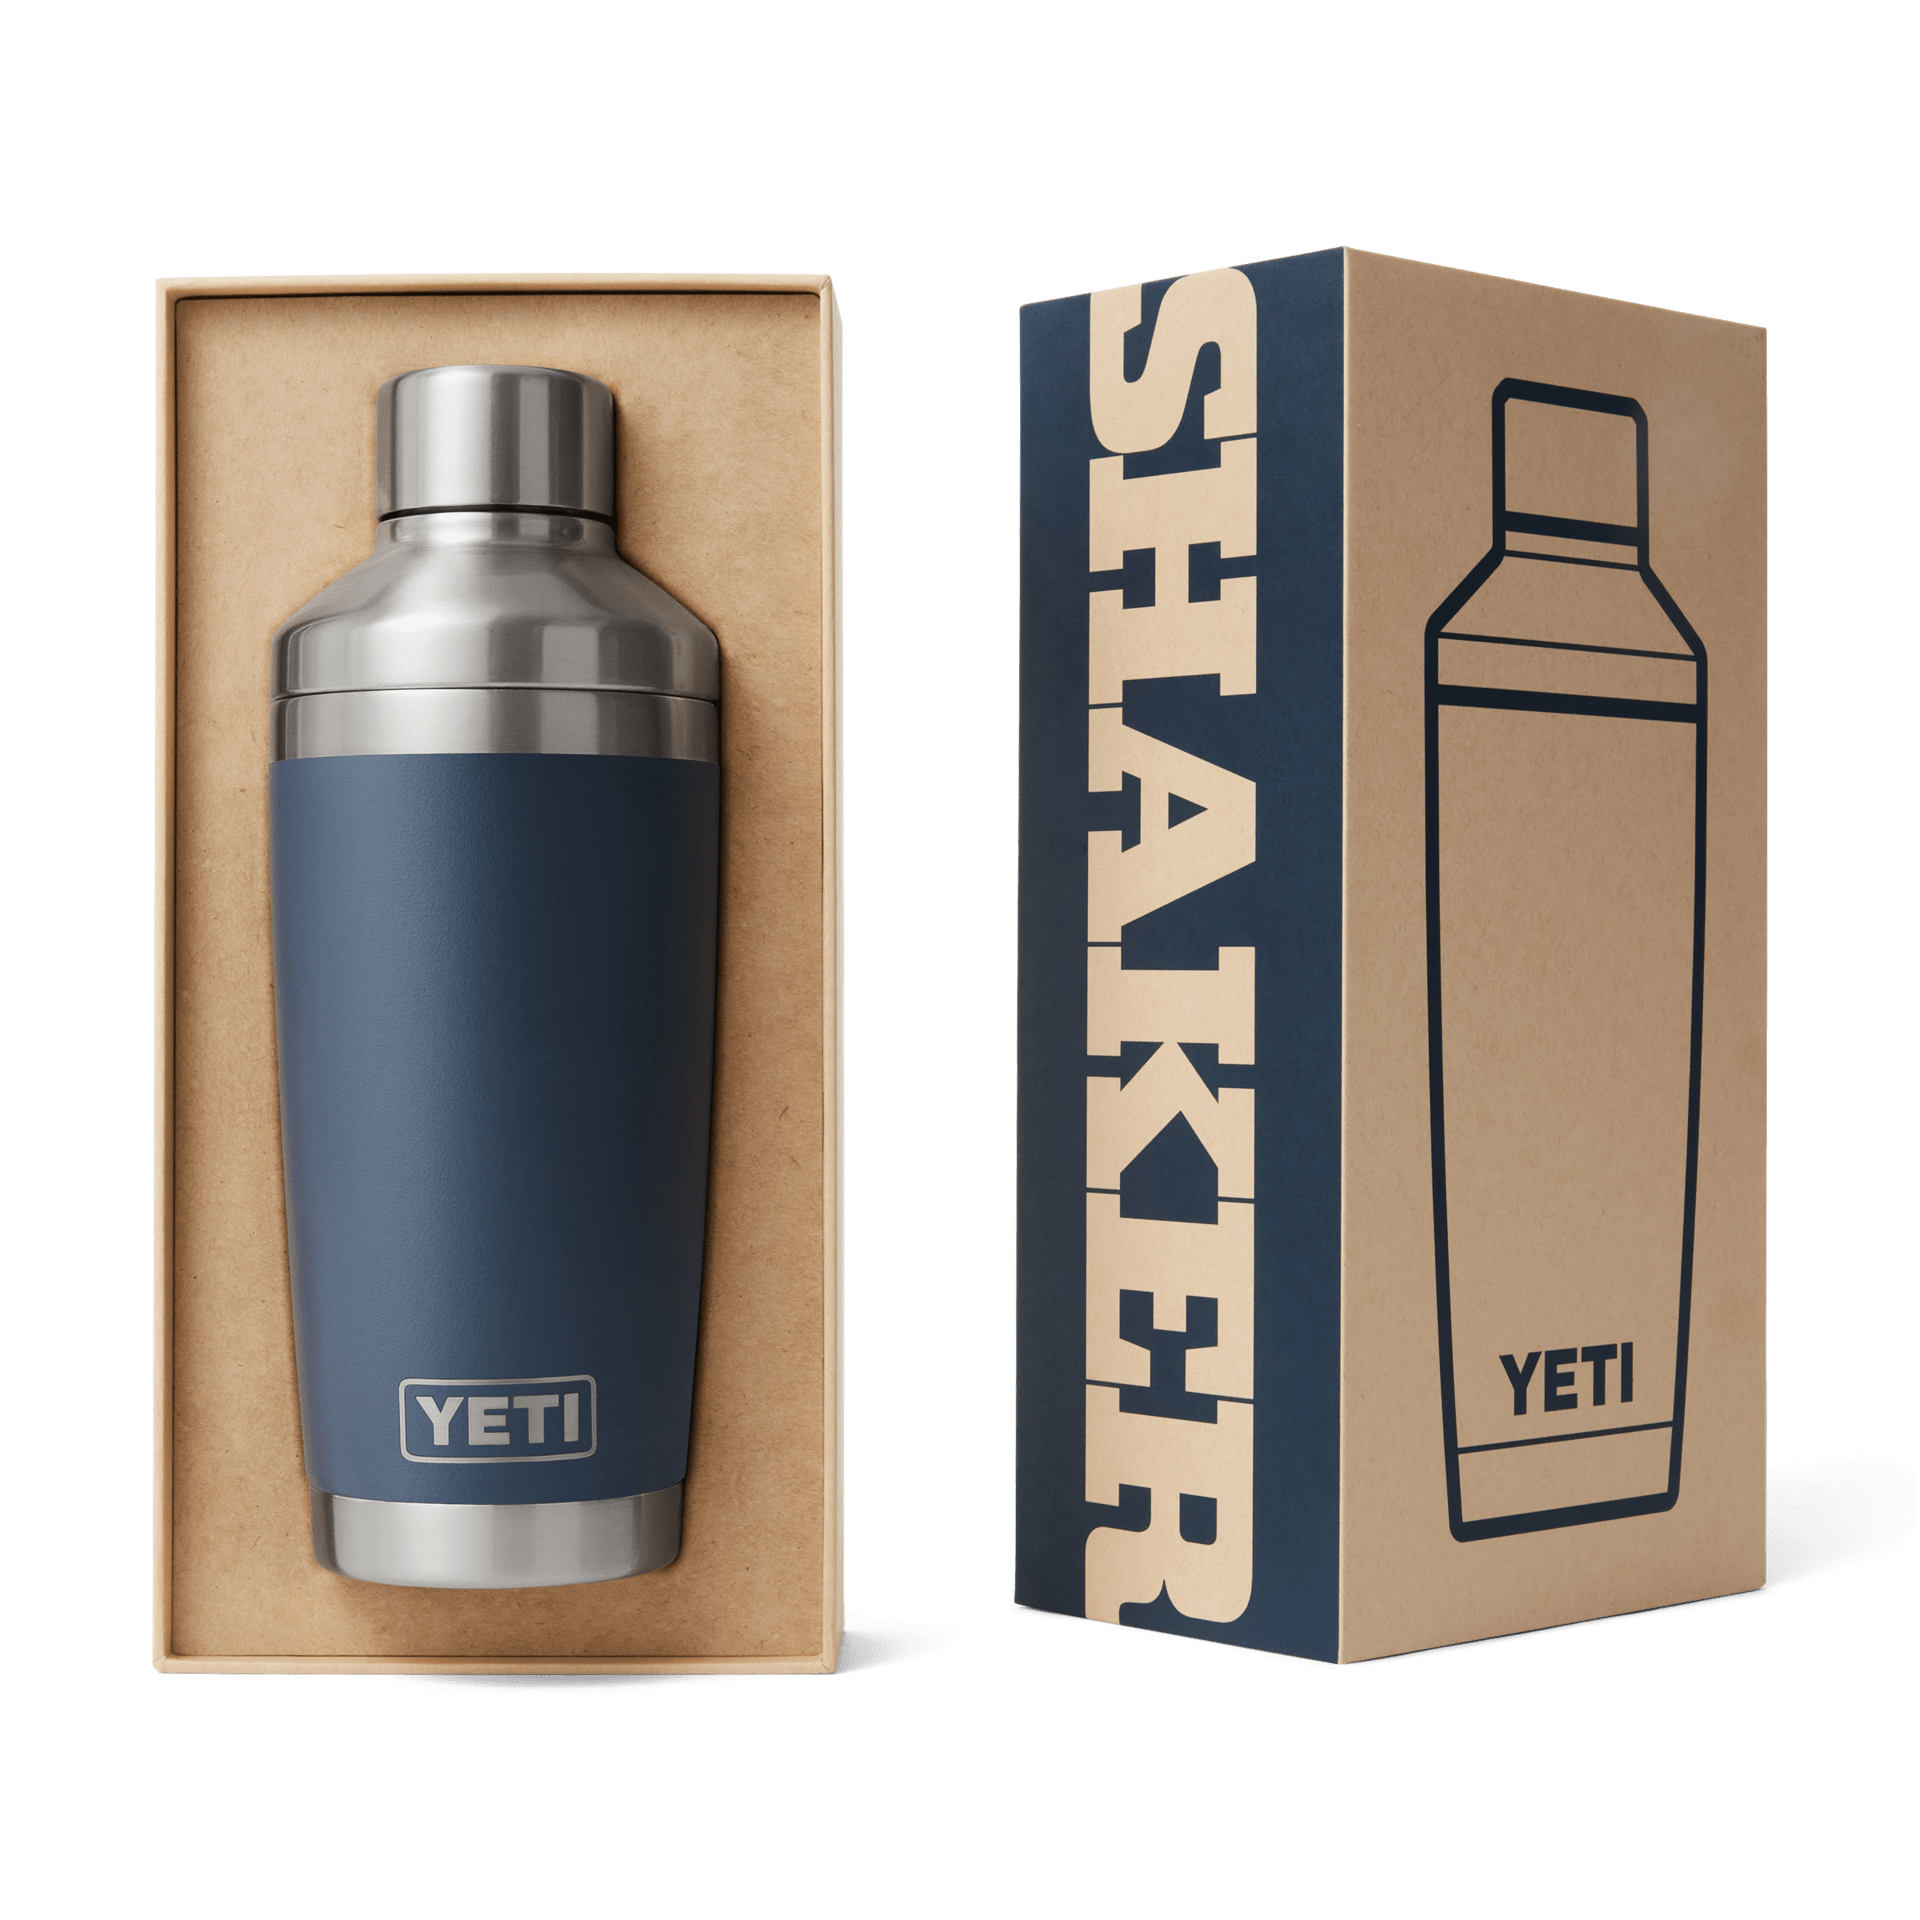 JUST DROPPED @yeti La Cantera: The all-new Rambler™ Cocktail